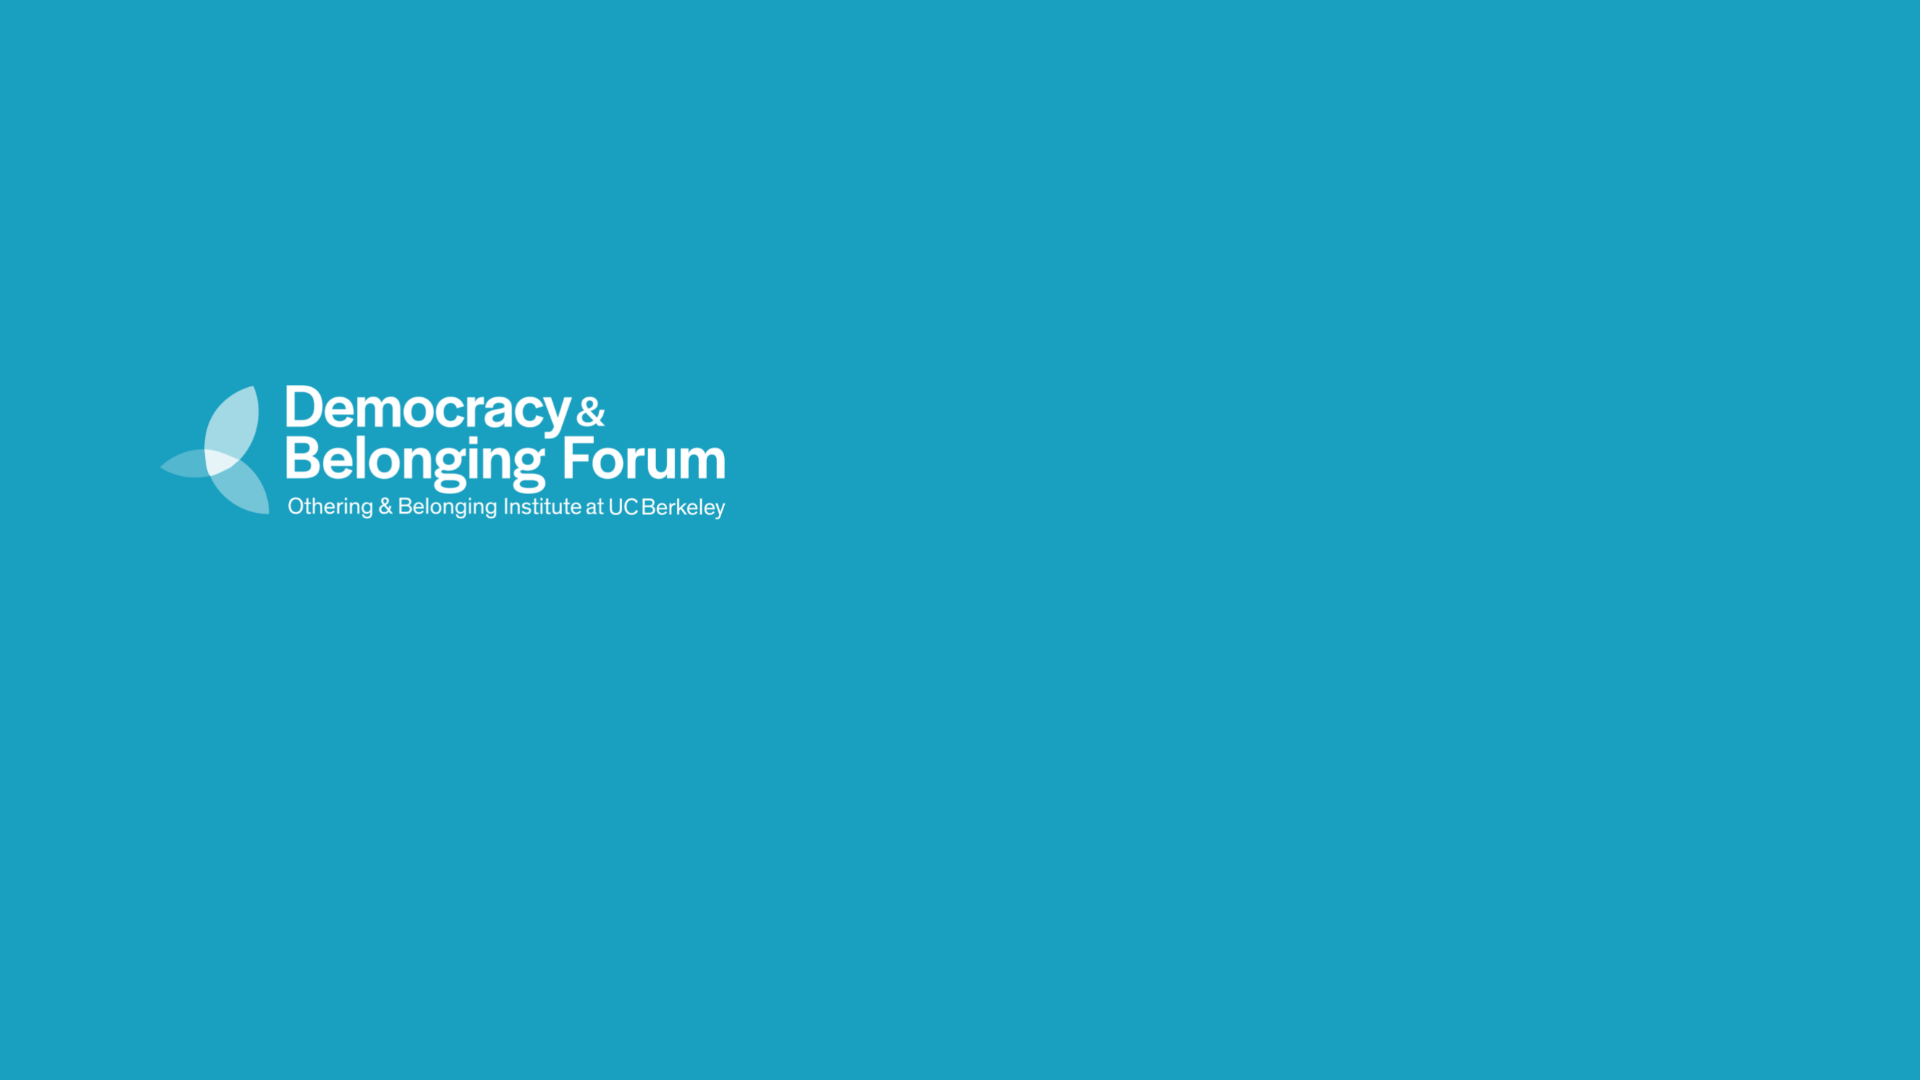 Logo for Forum in blue background